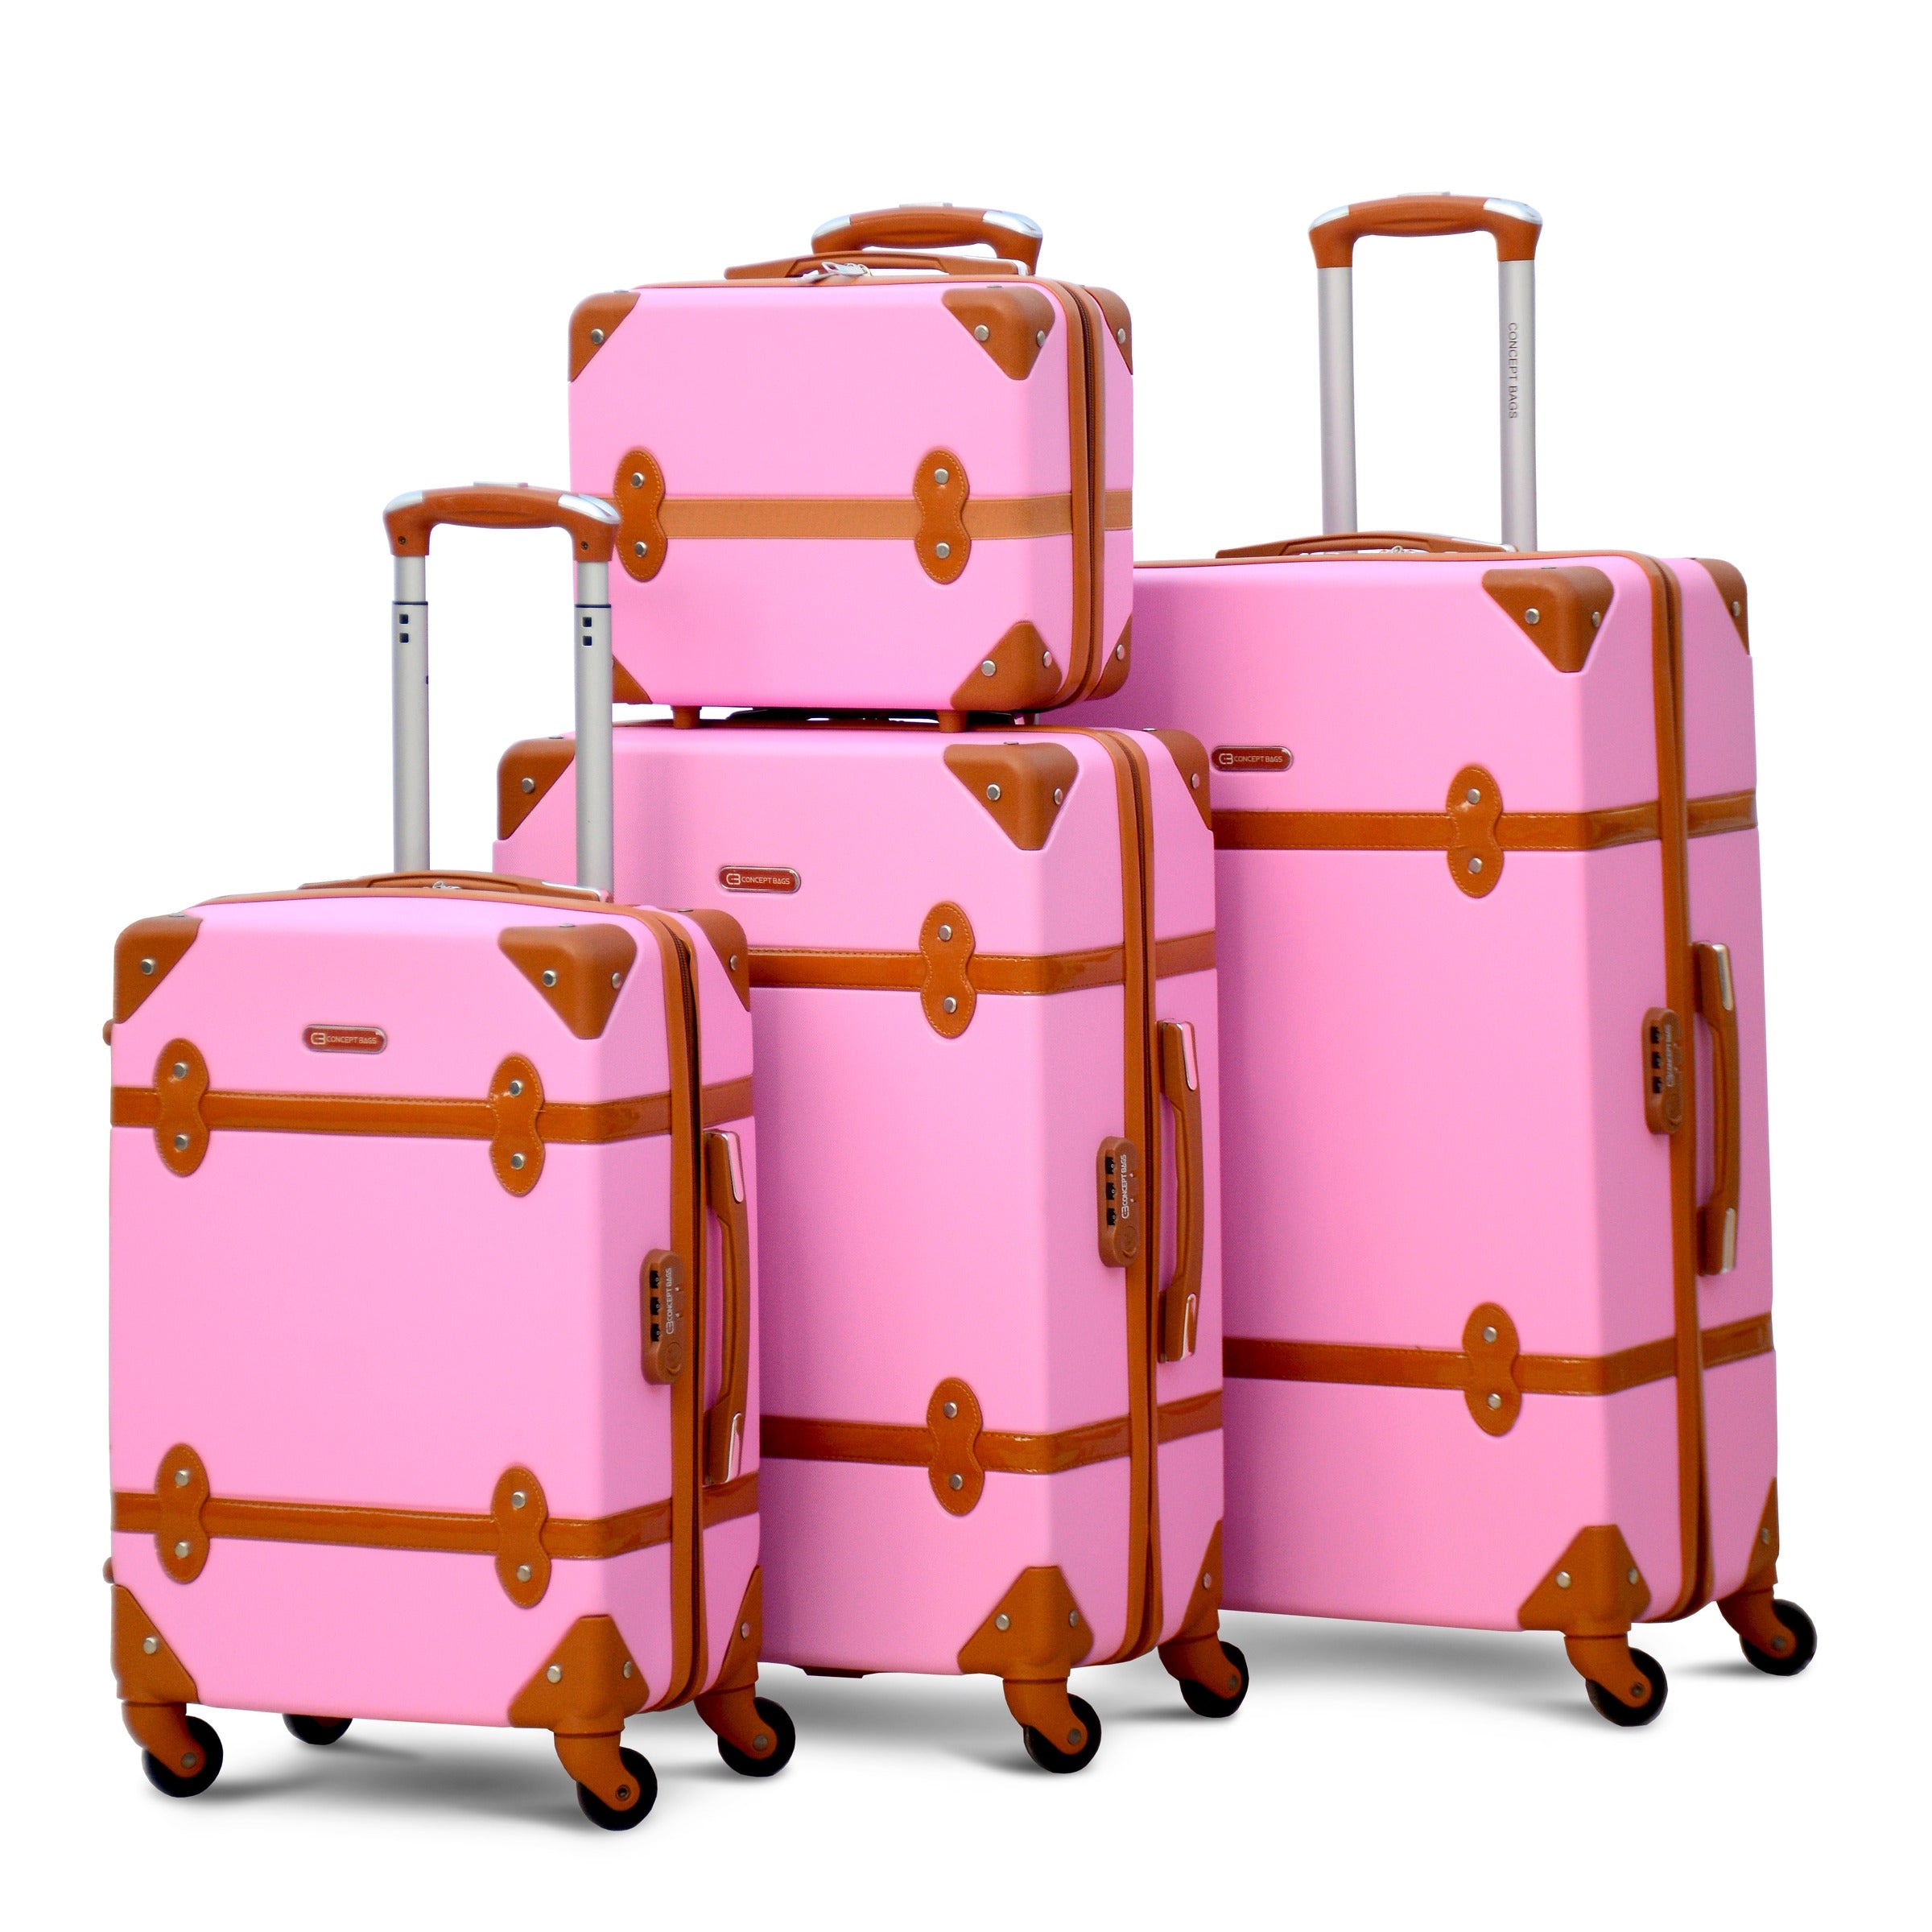 Corner Guard Lightweight ABS Luggage | 4 Pcs Full Set 7” 20” 24” 28 Inches | Pink  Hard Case Trolley Bag